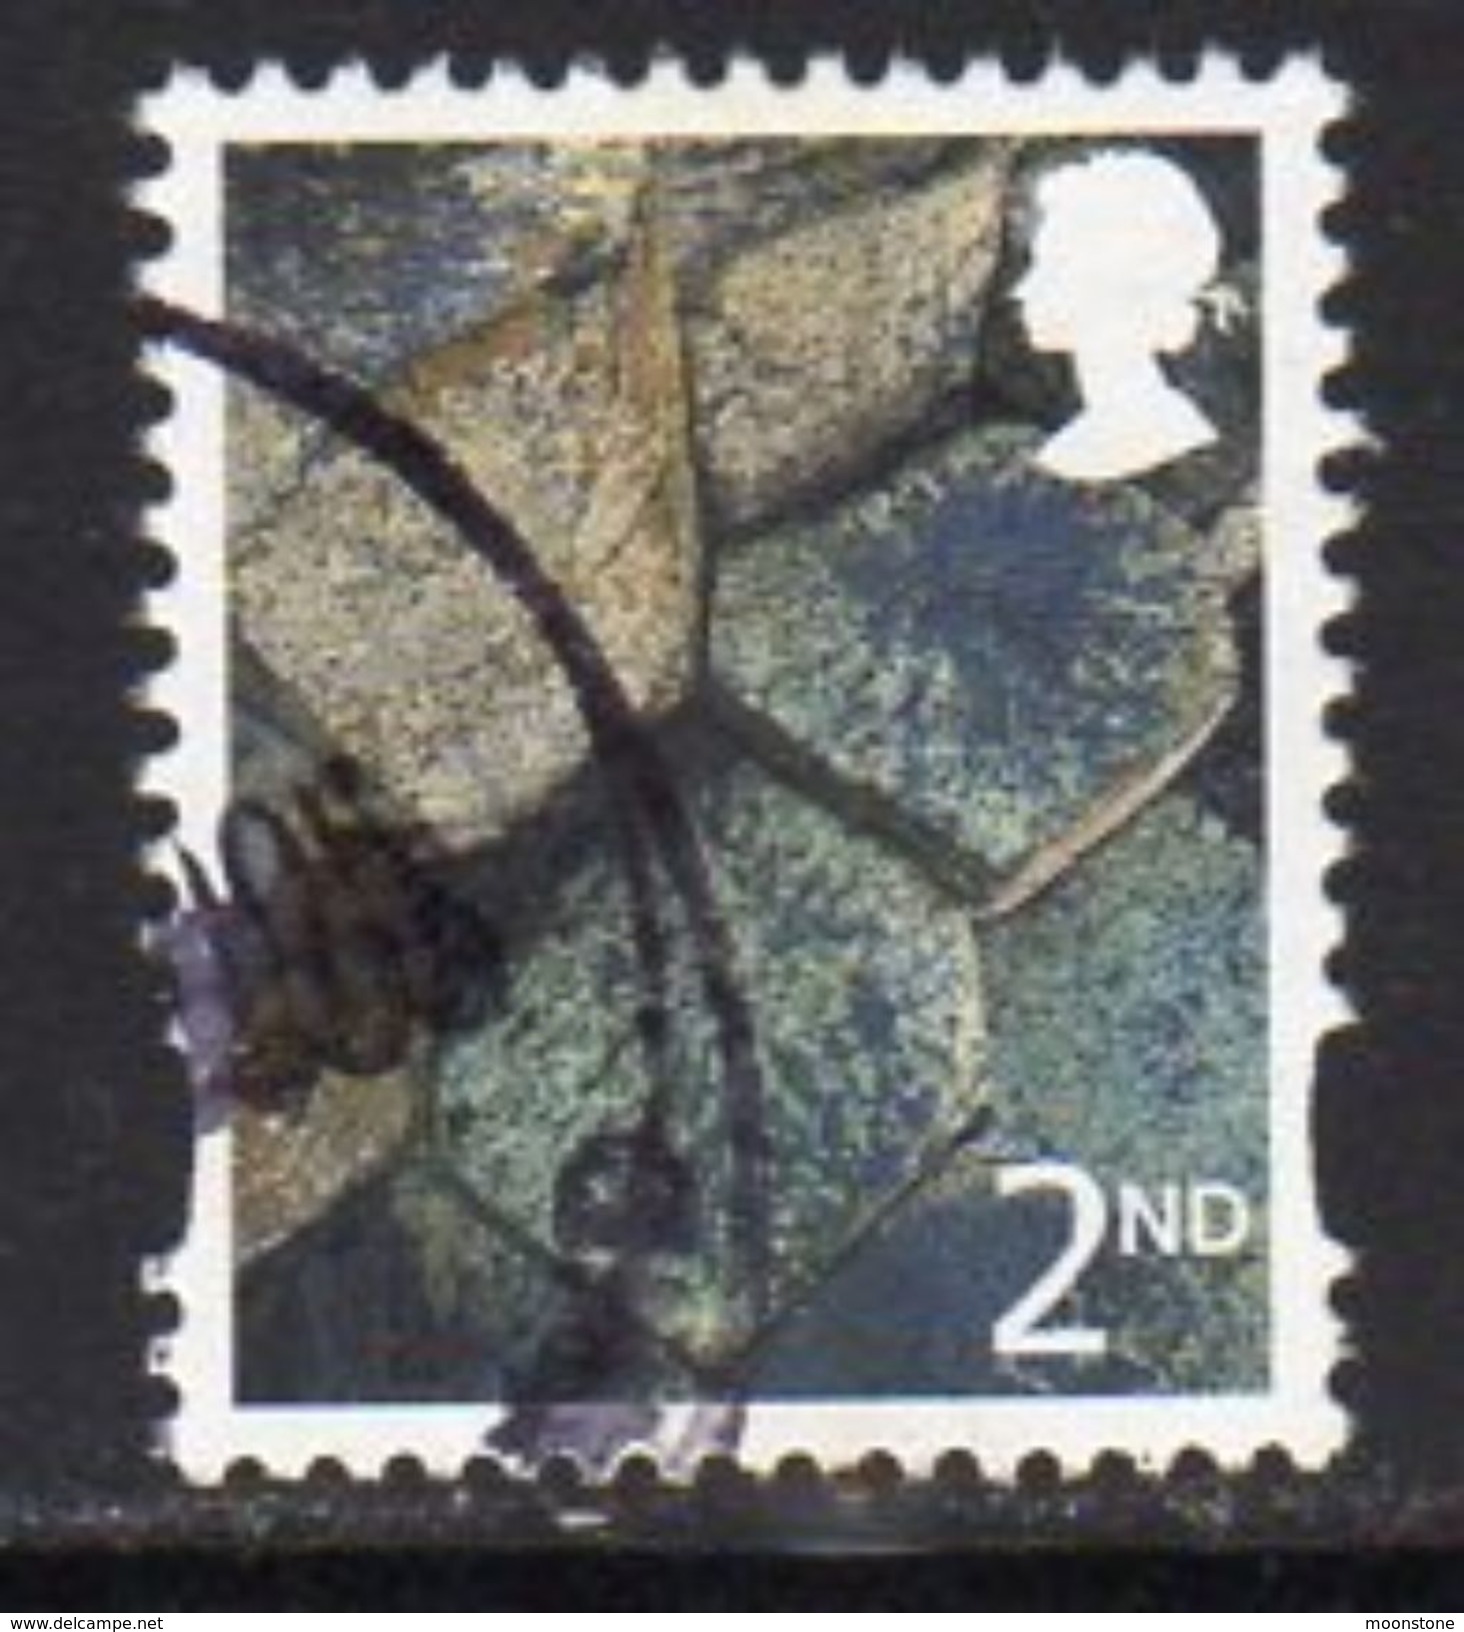 GB N. Ireland 2003-17 2nd Class With Border Regional Country, Used, SG 94 - Nordirland